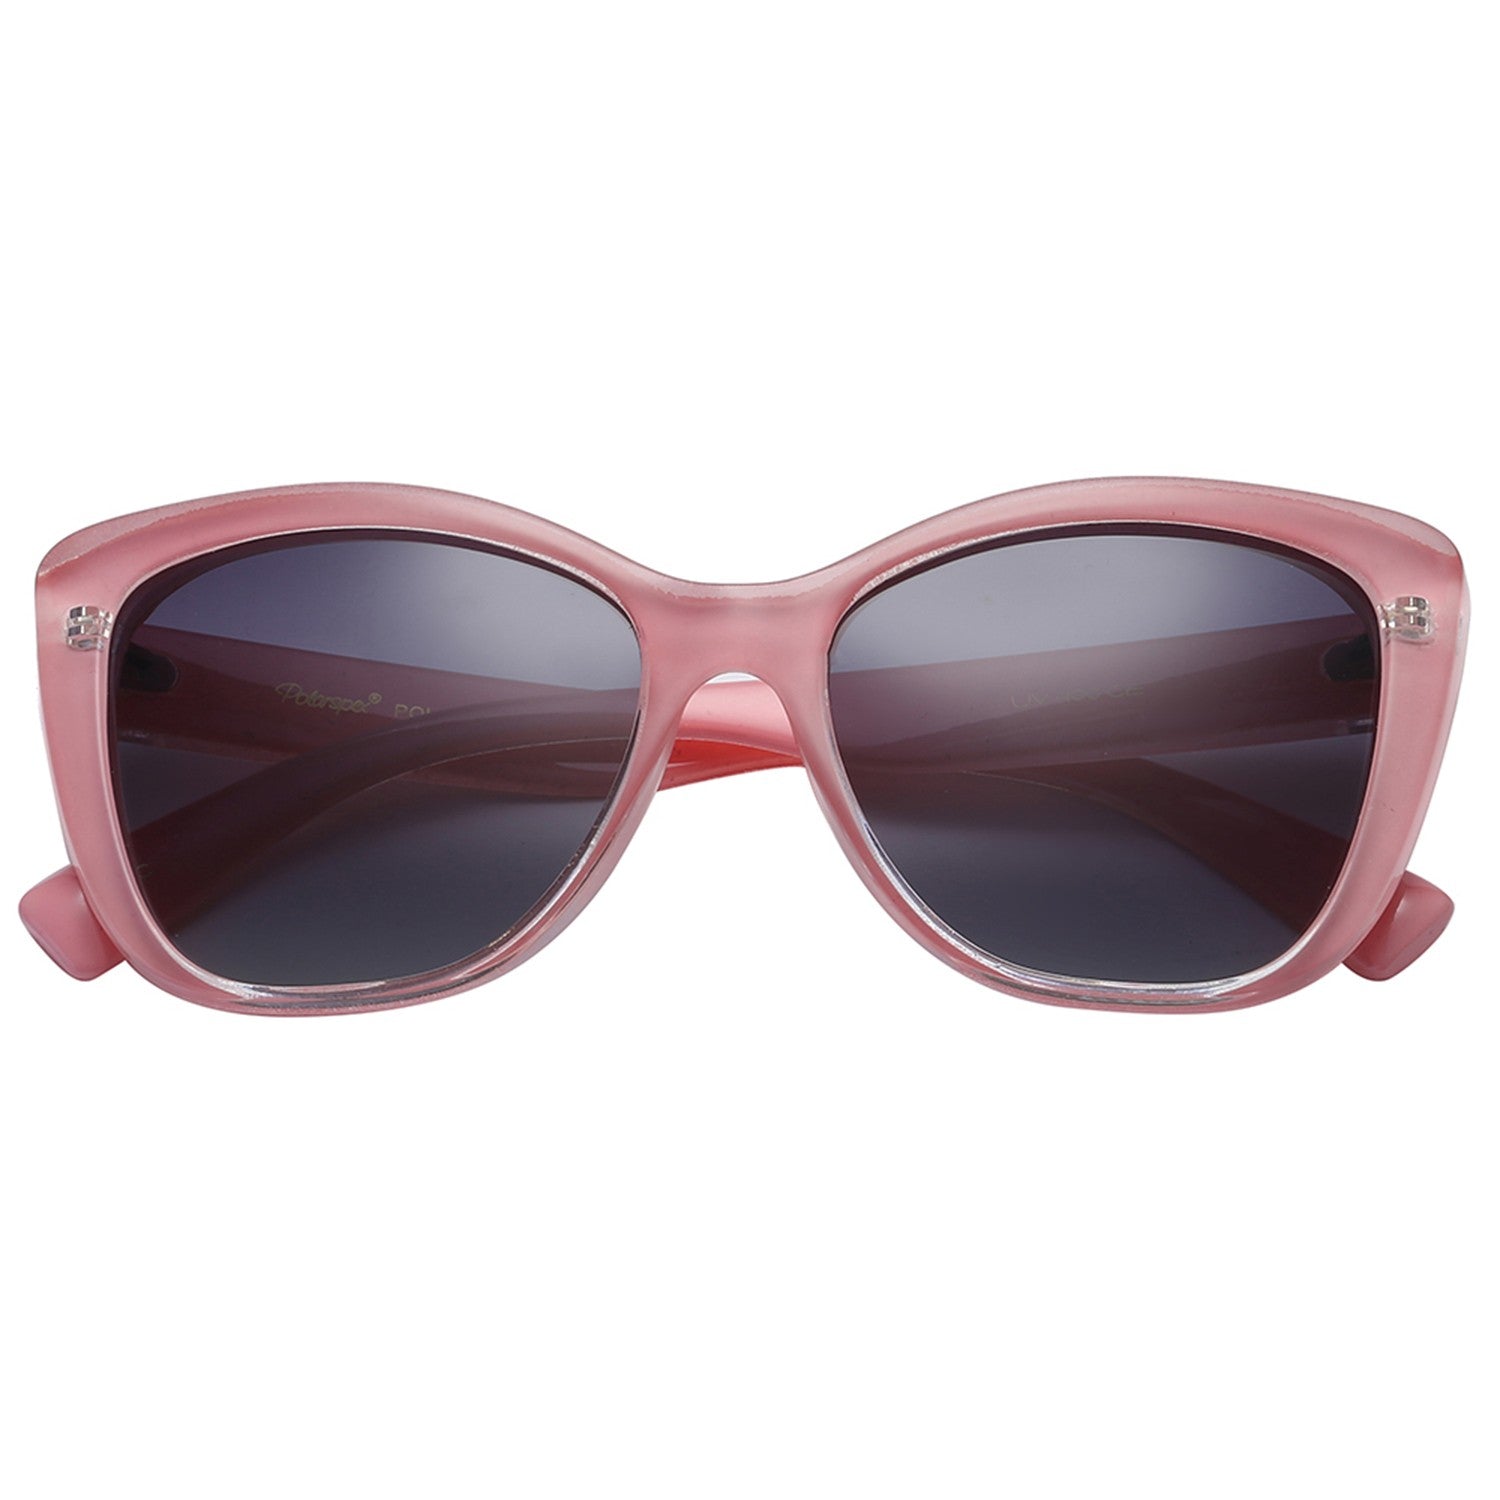 Polarspex Polarized Jackie-O Cat Eyes Style Sunglasses with Princess Pink Frames and Polarized Gradient Smoke Lenses for Women